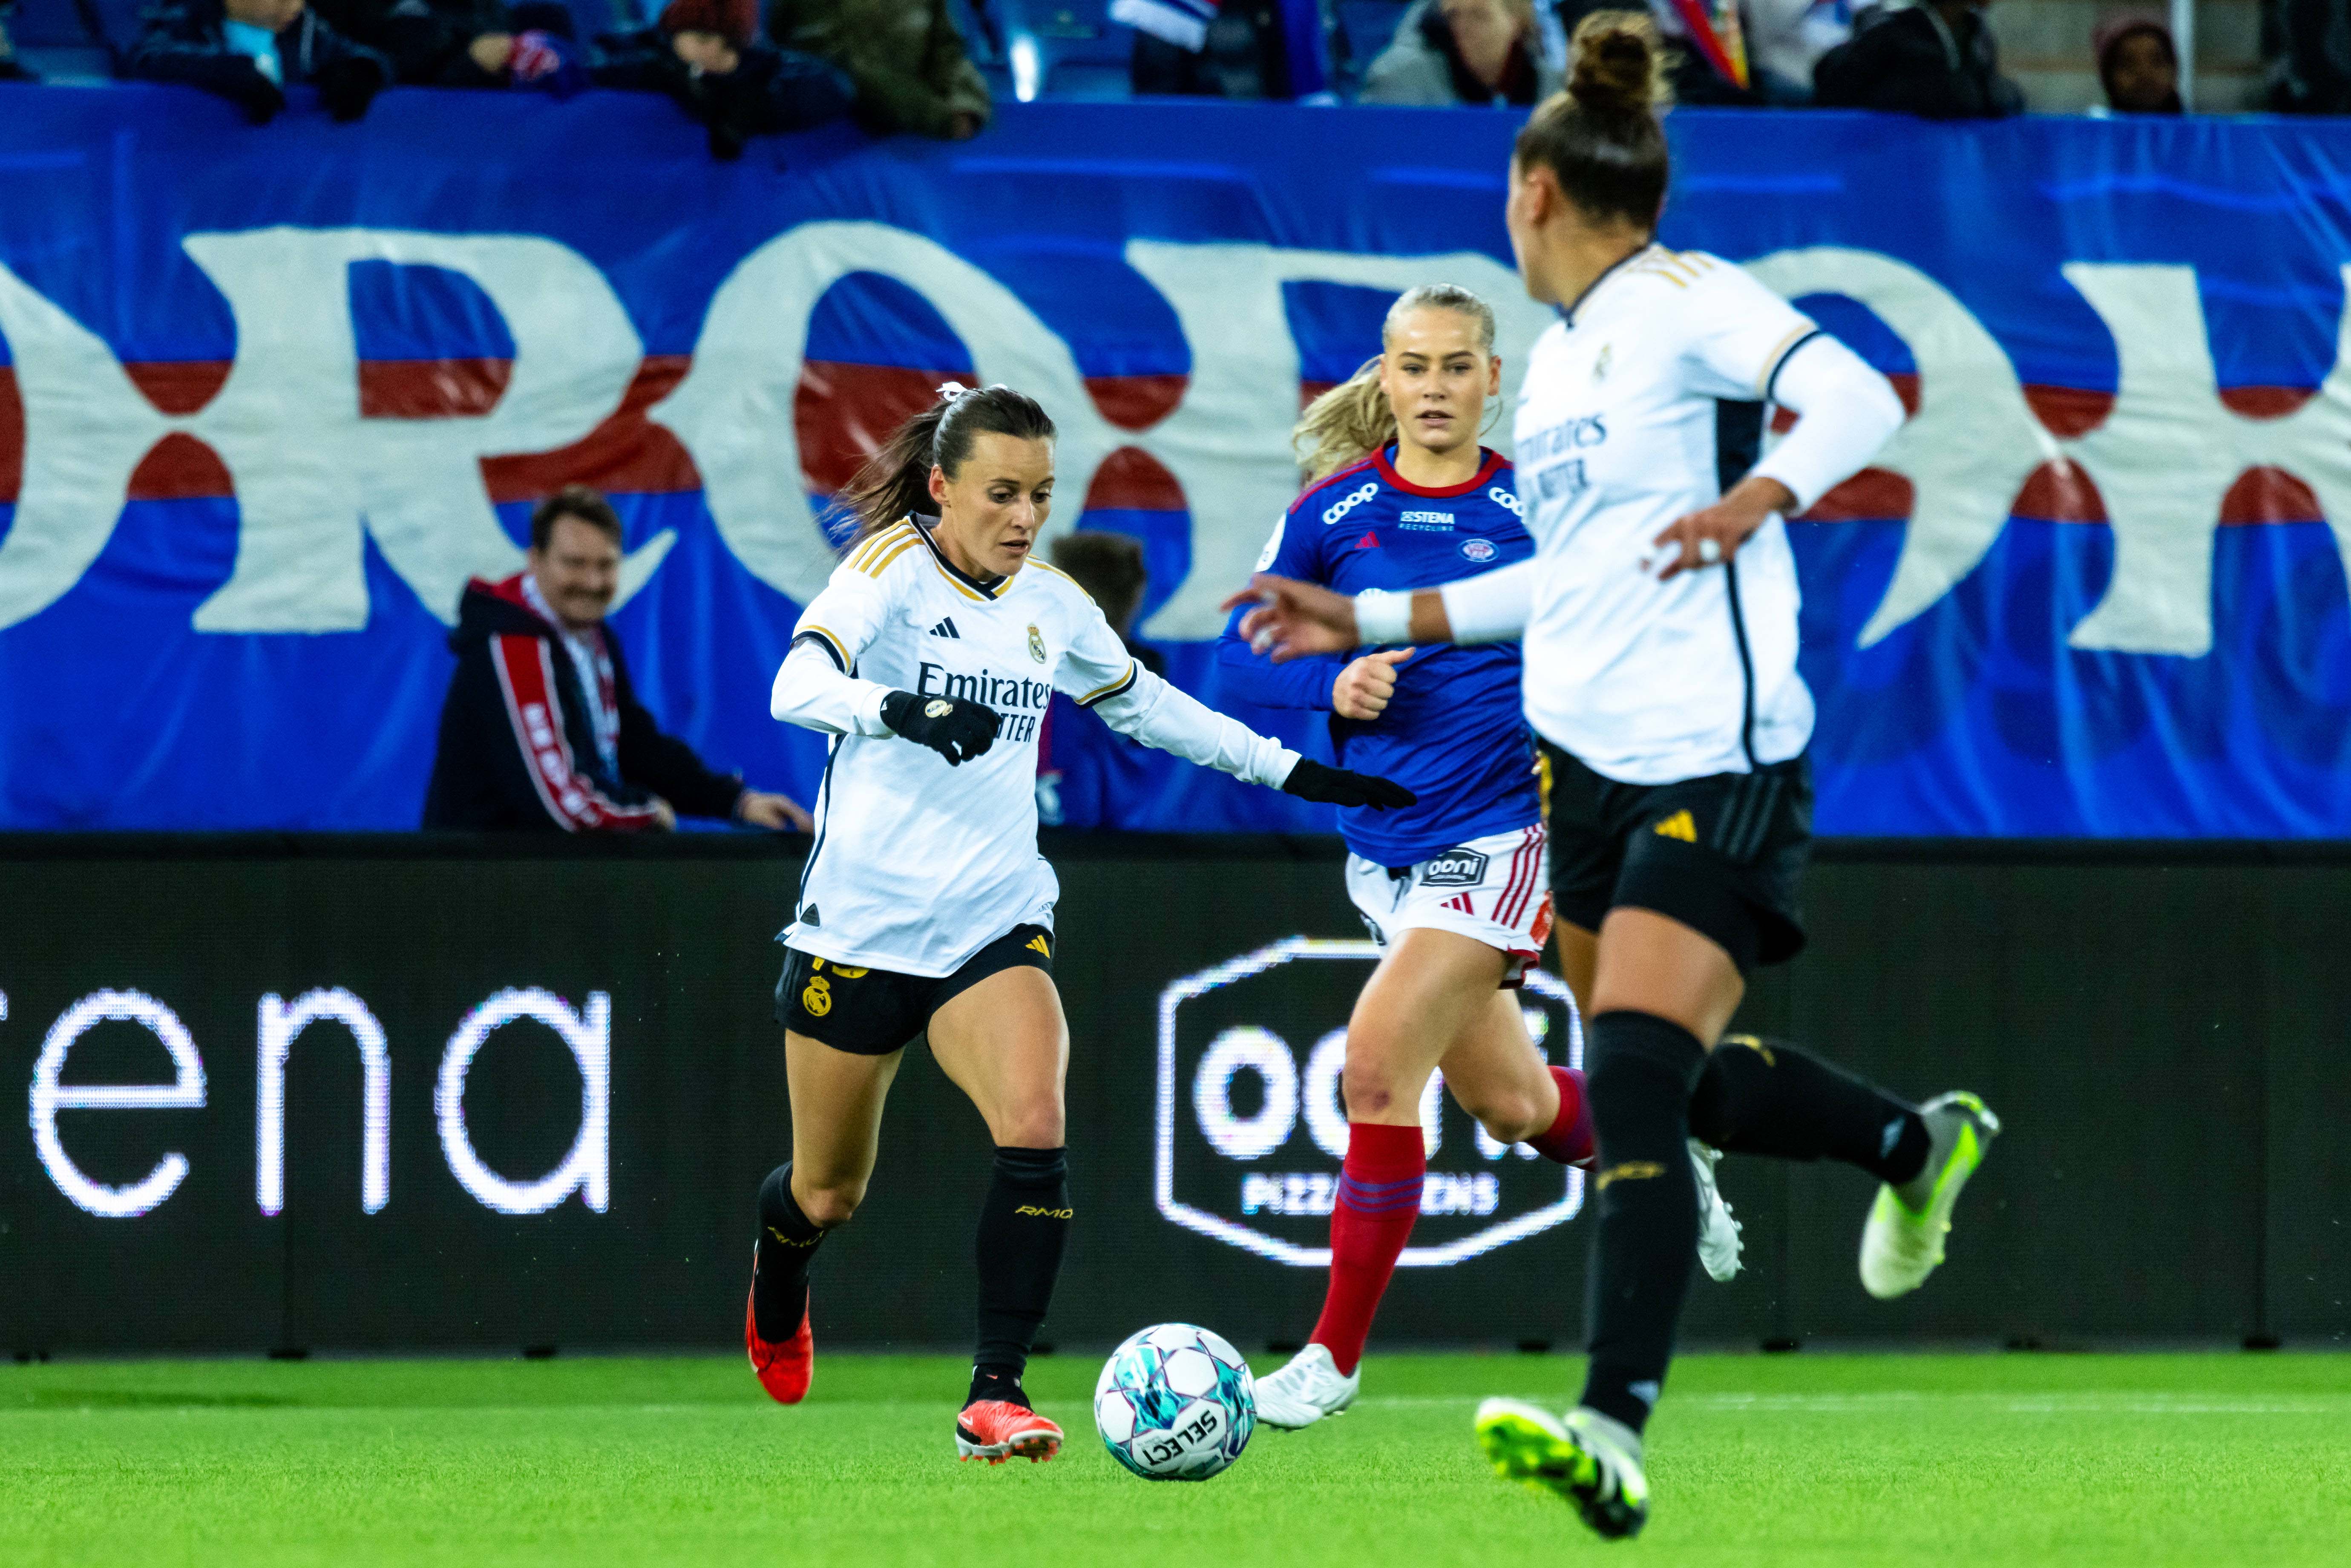 Hayley Raso (15) of Real Madrid seen during the UEFA Women™s Champions League qualification match between Vaalerenga and Real Madrid at Intility Arena in Oslo.